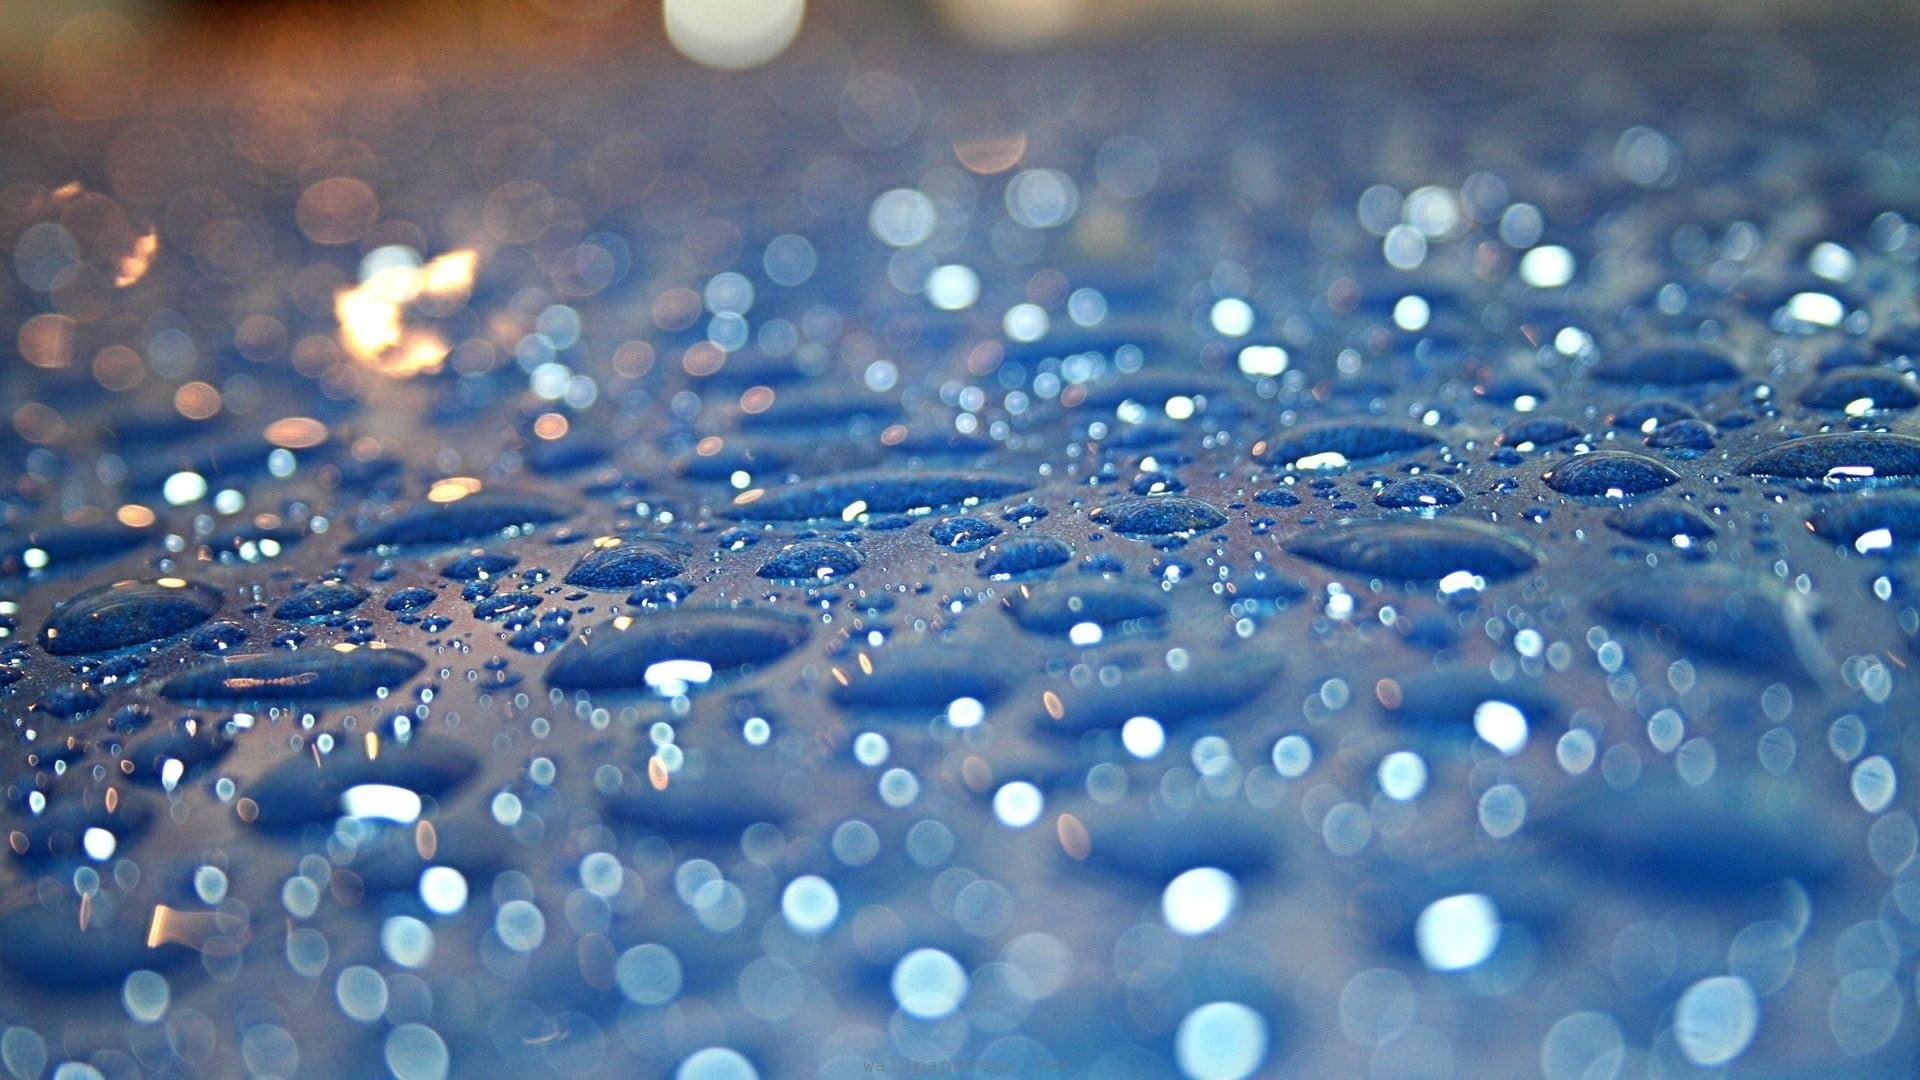 Water Droplet Wallpaper background picture